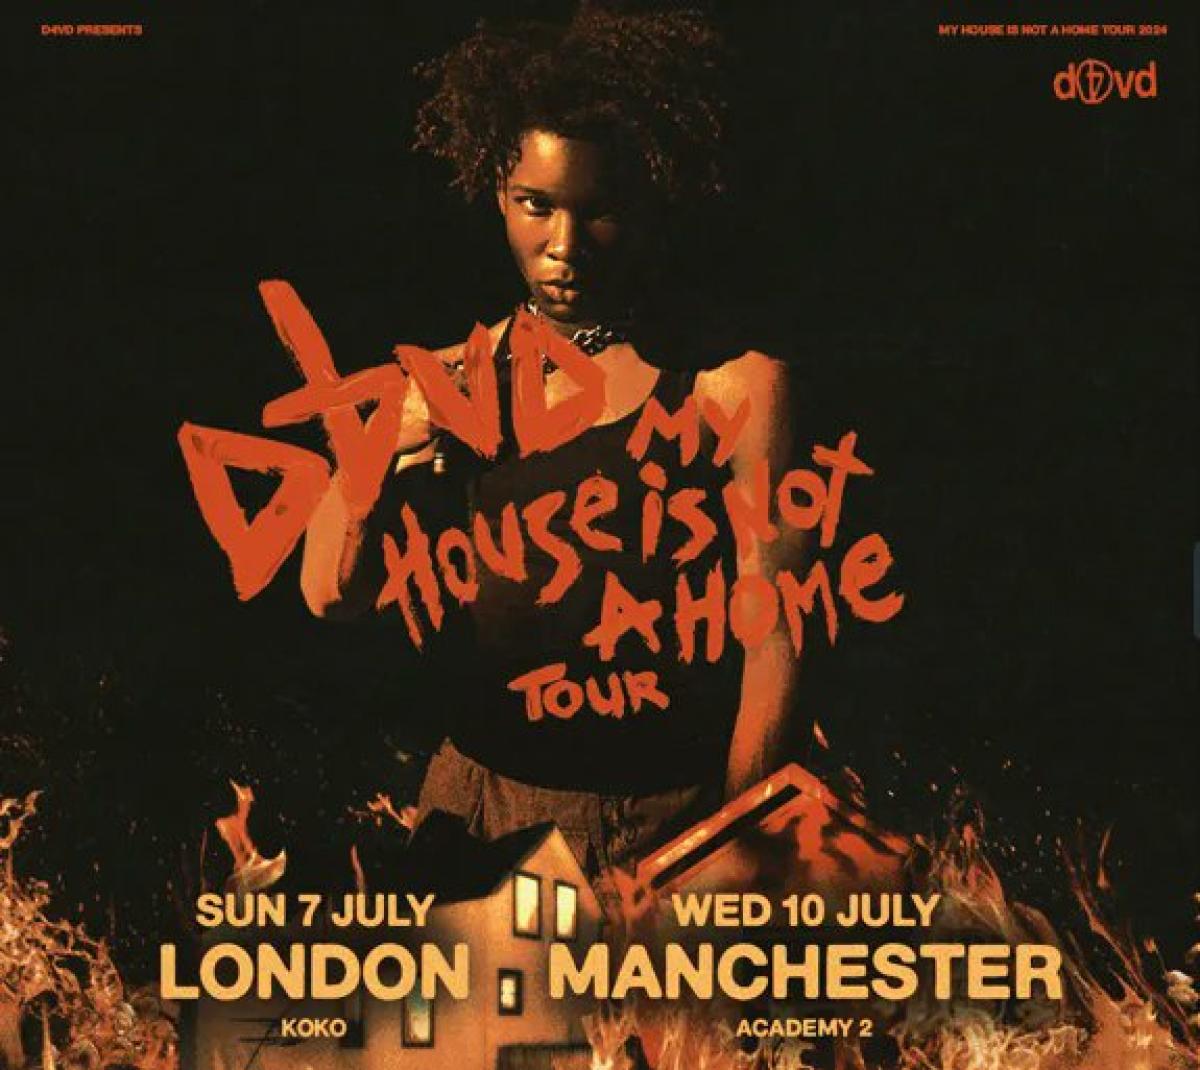 D4vd - My House Is Not A Home Tour in der Manchester Academy Tickets